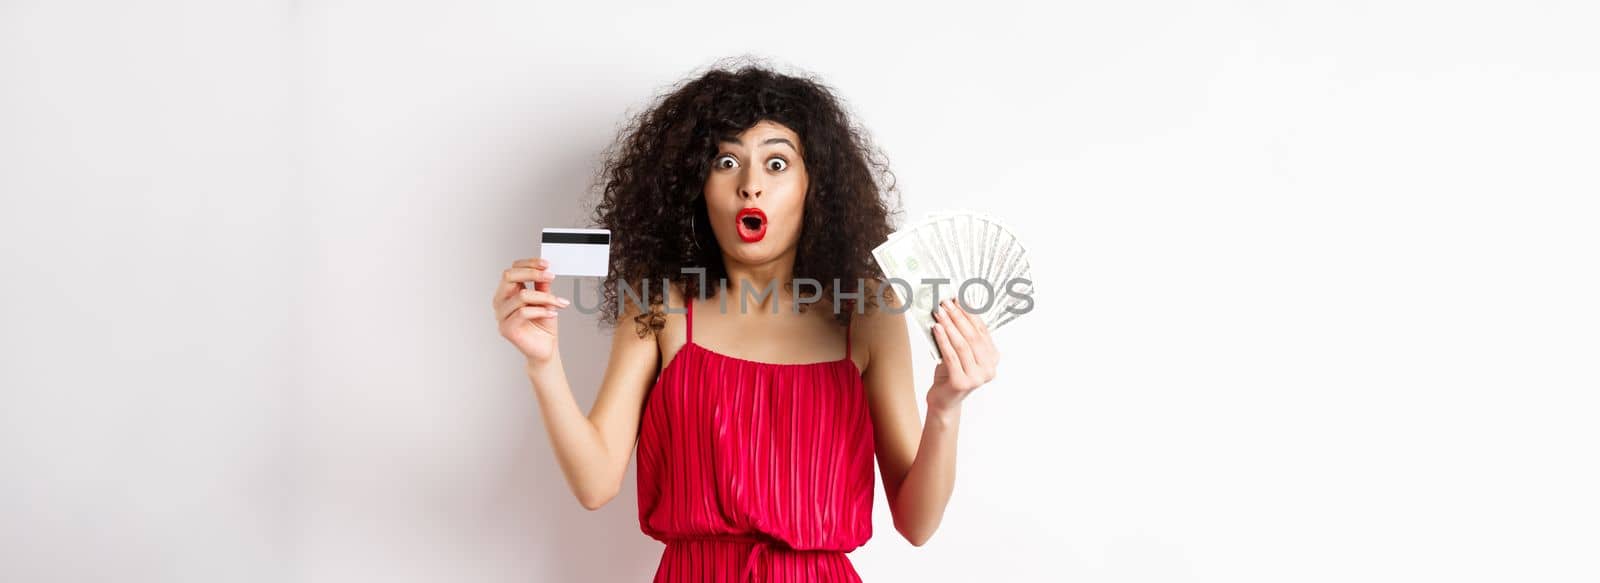 Impressed lady with curly hair and trendy red dress, saying wow, showing plastic credit card with cash, standing on white background.